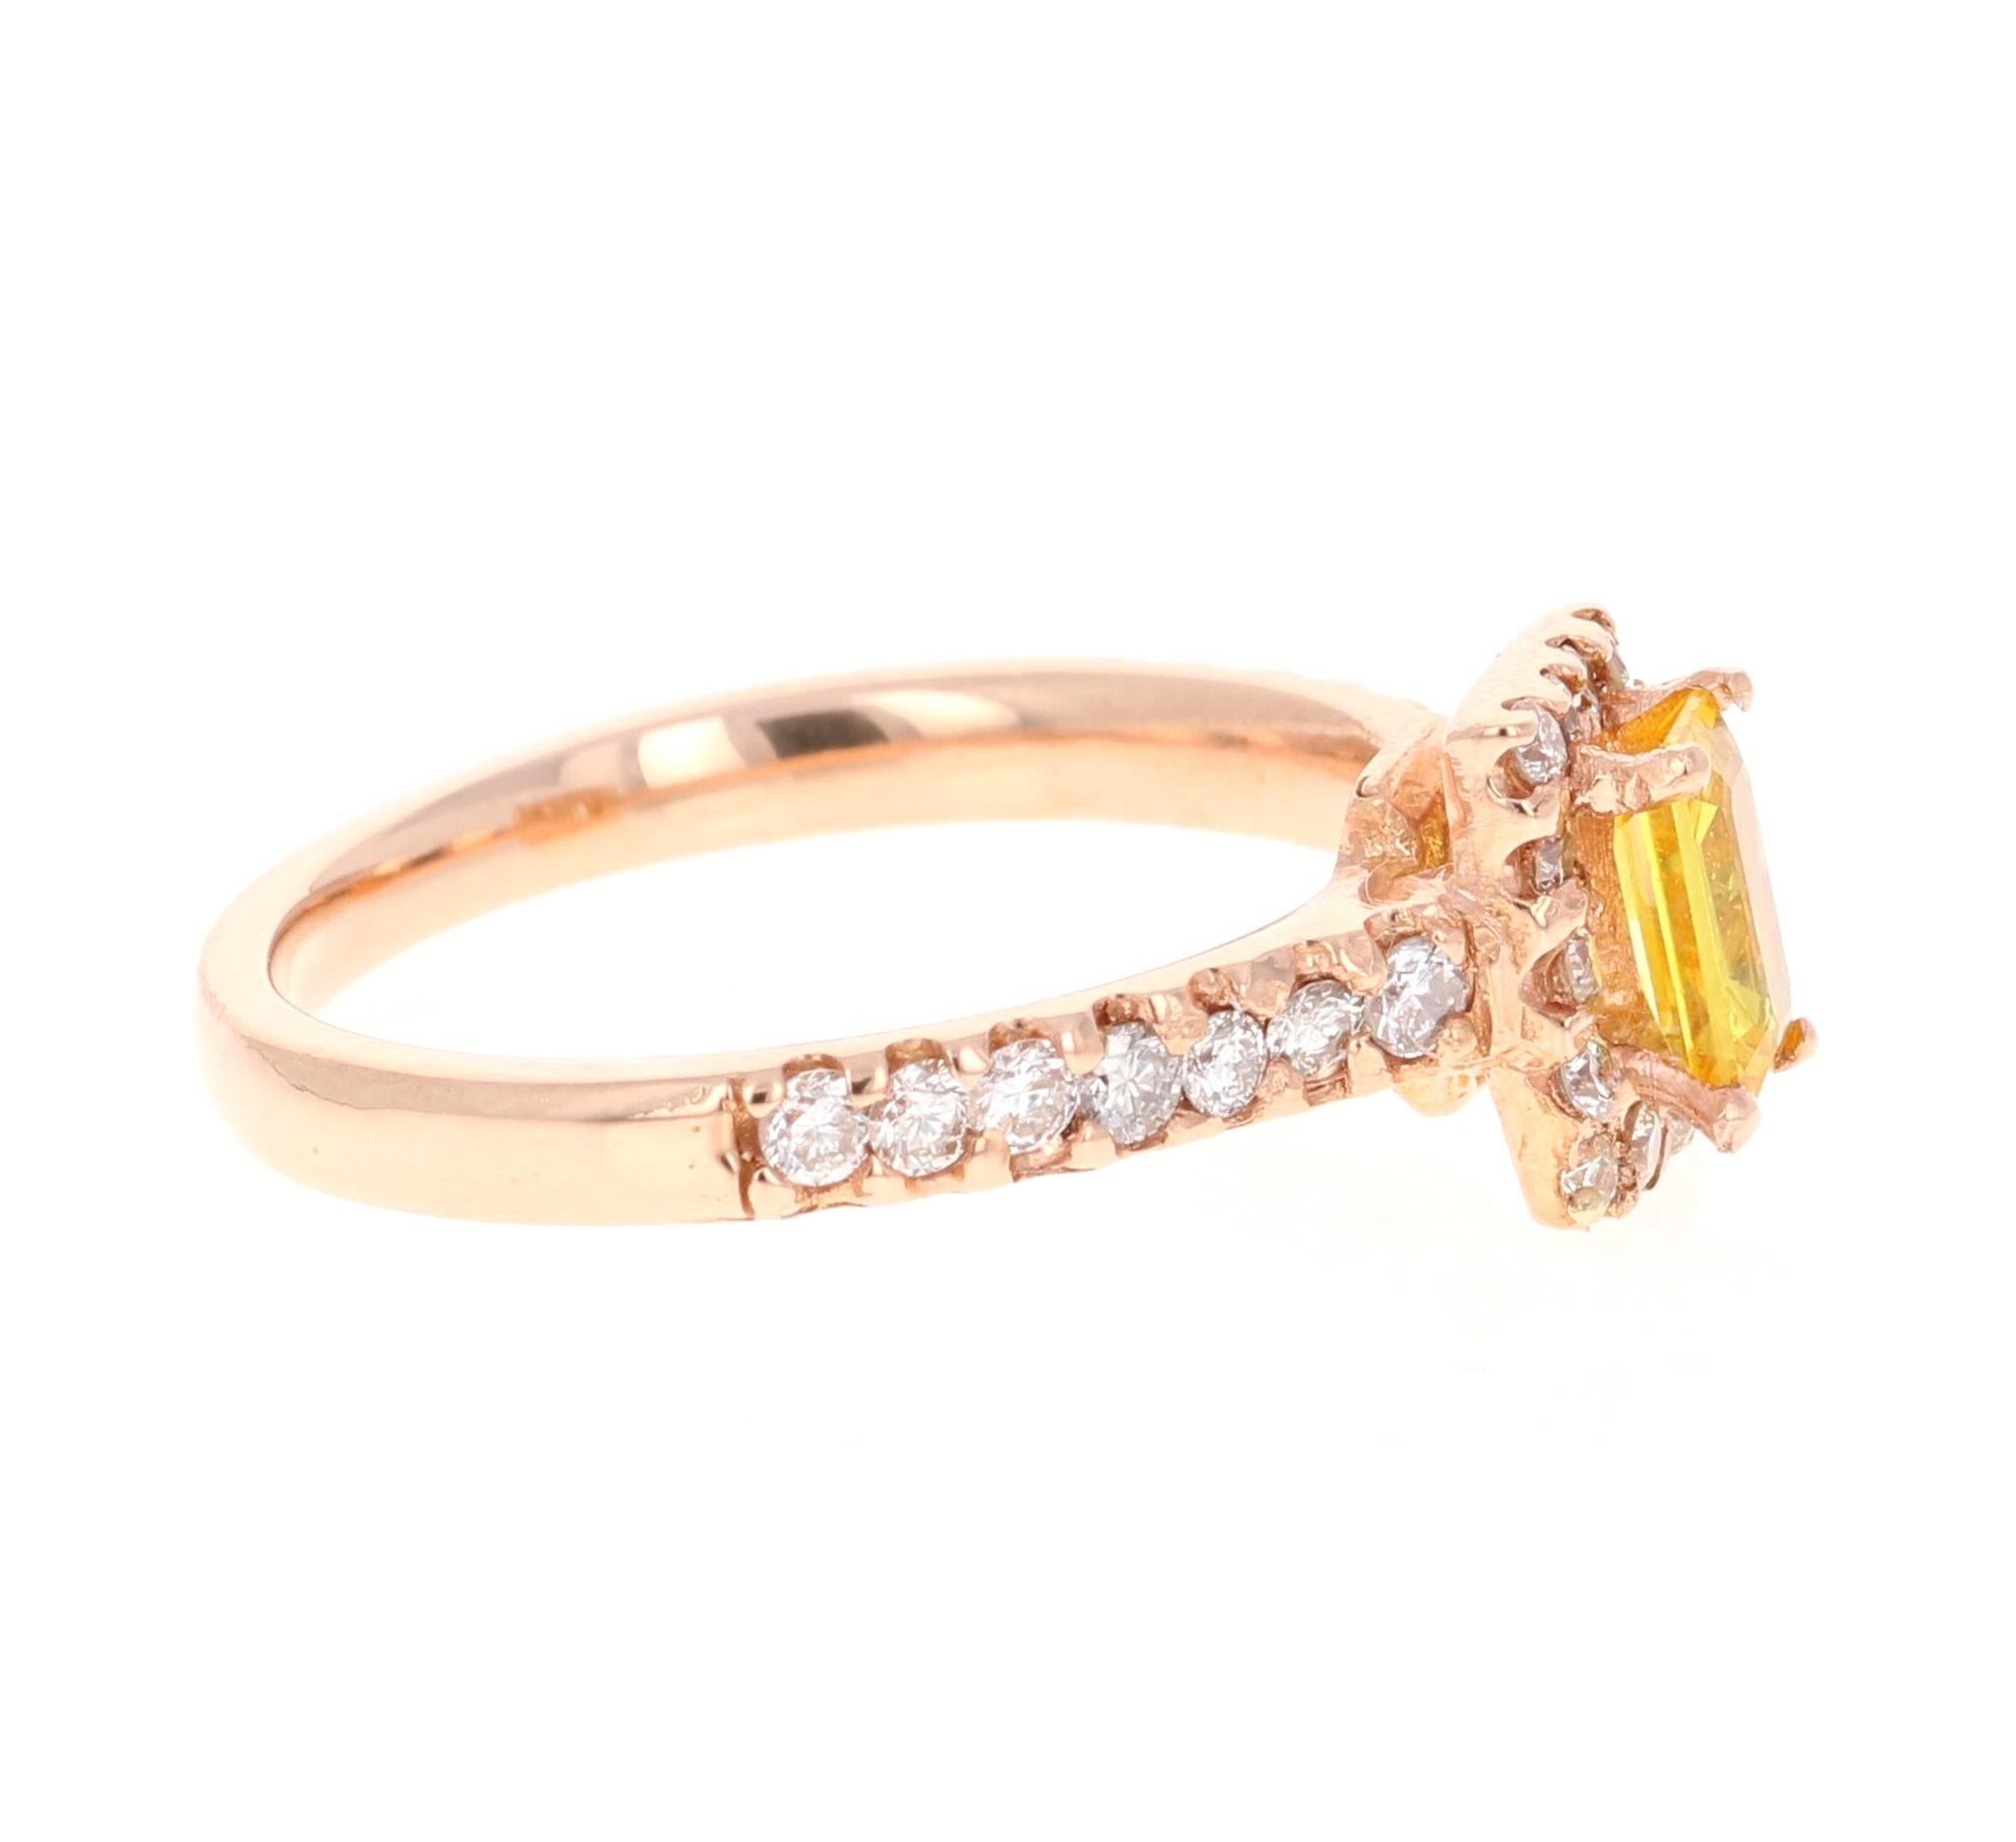 Contemporary 1.16 Carat Yellow Sapphire and Diamond 18 Karat Rose Gold Ring For Sale